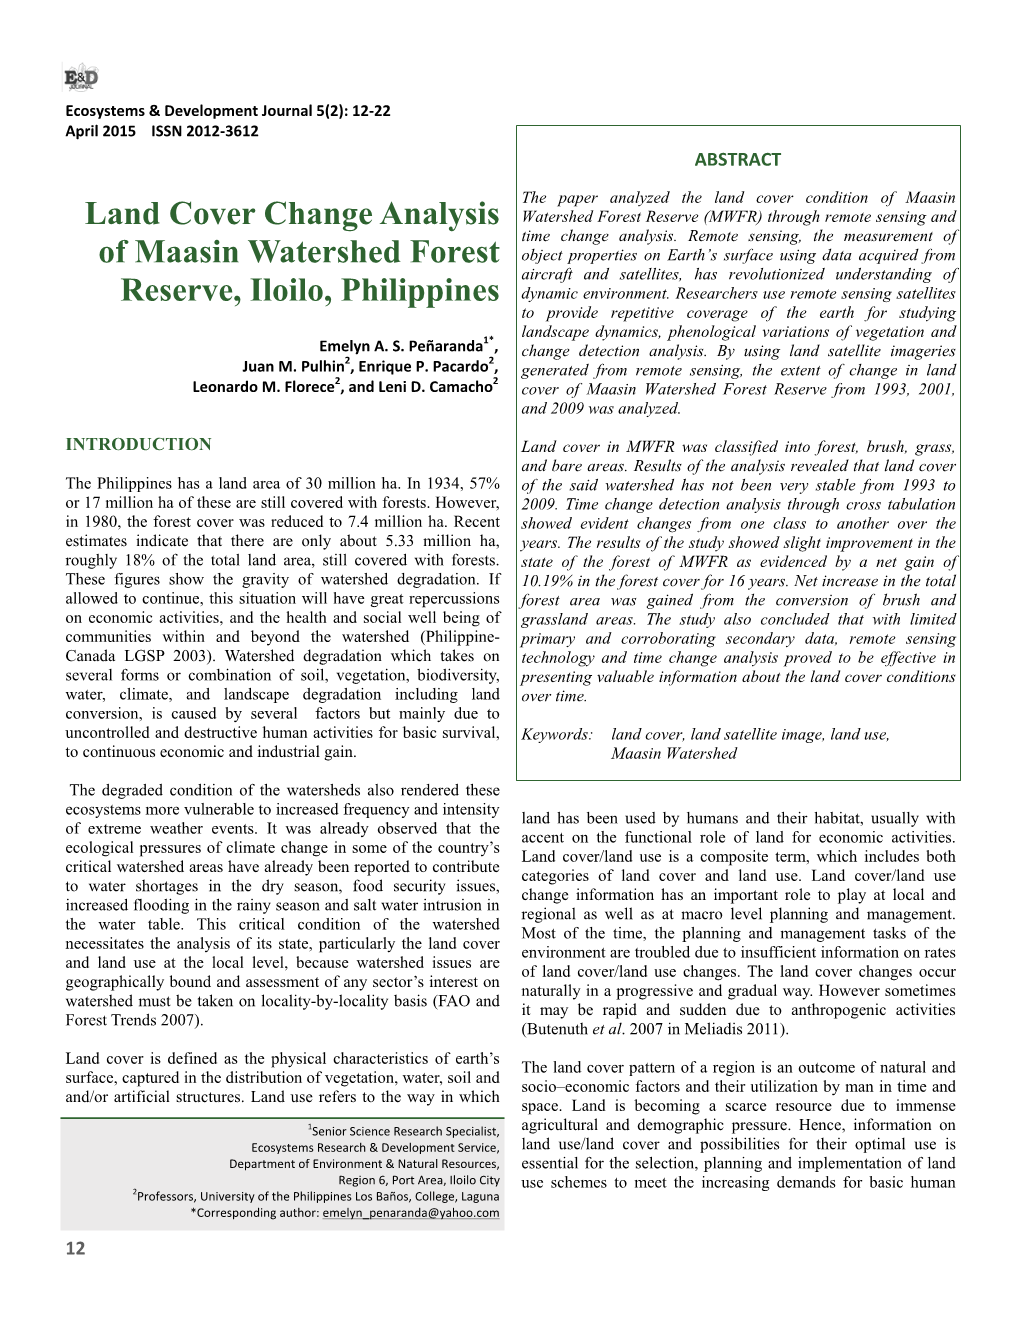 Land Cover Change Analysis of Maasin Watershed Forest Reserve